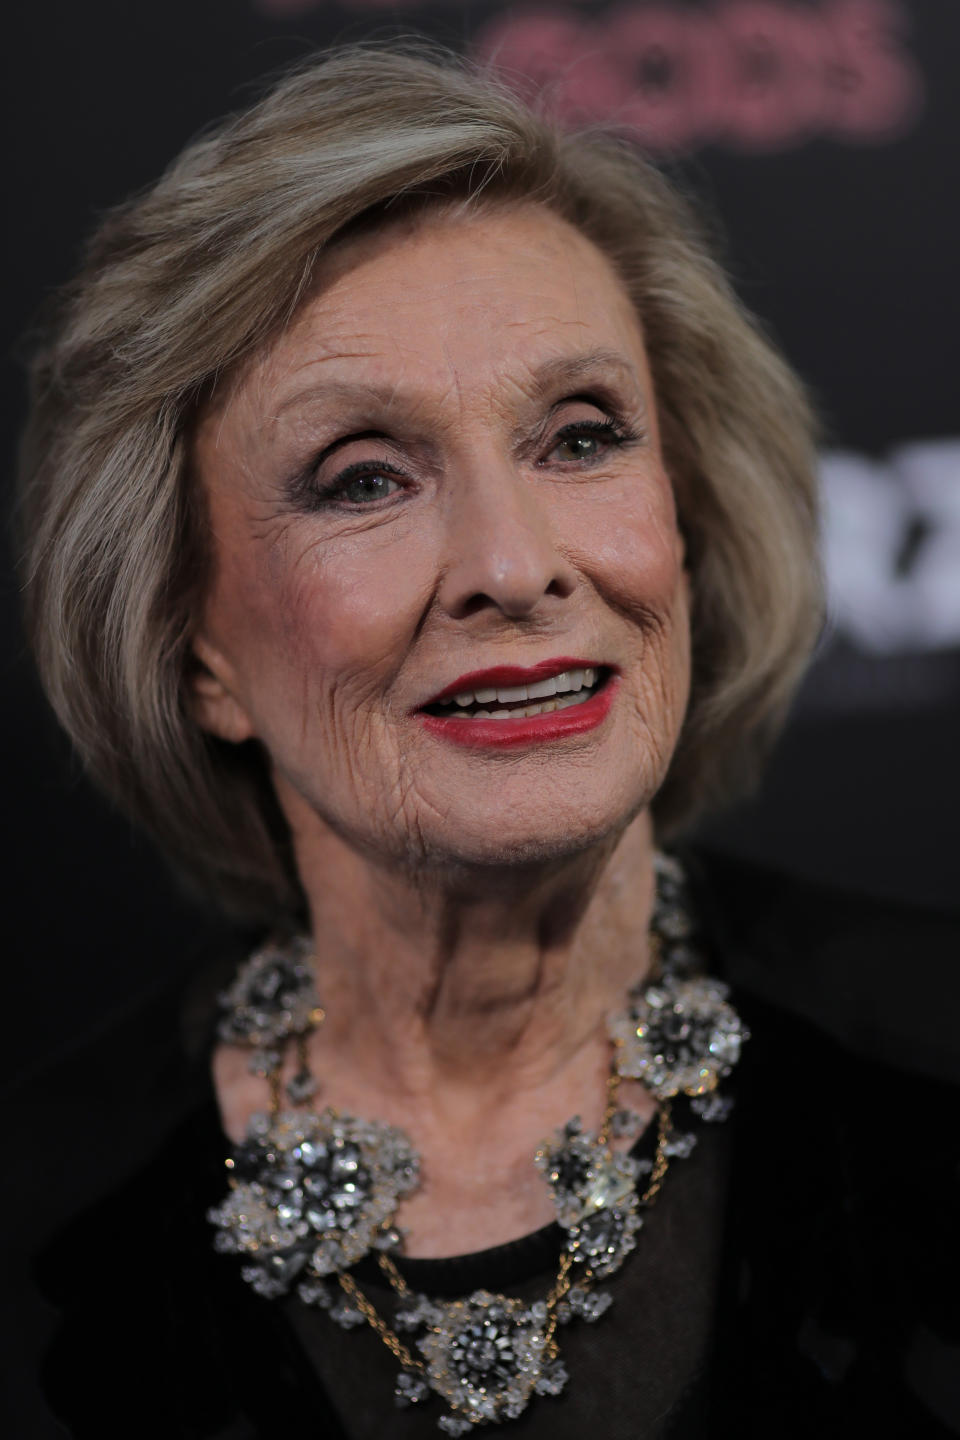 Actress Cloris Leachman died of natural causes Jan. 27 at age 94. (Neilson Barnard/Getty Images)